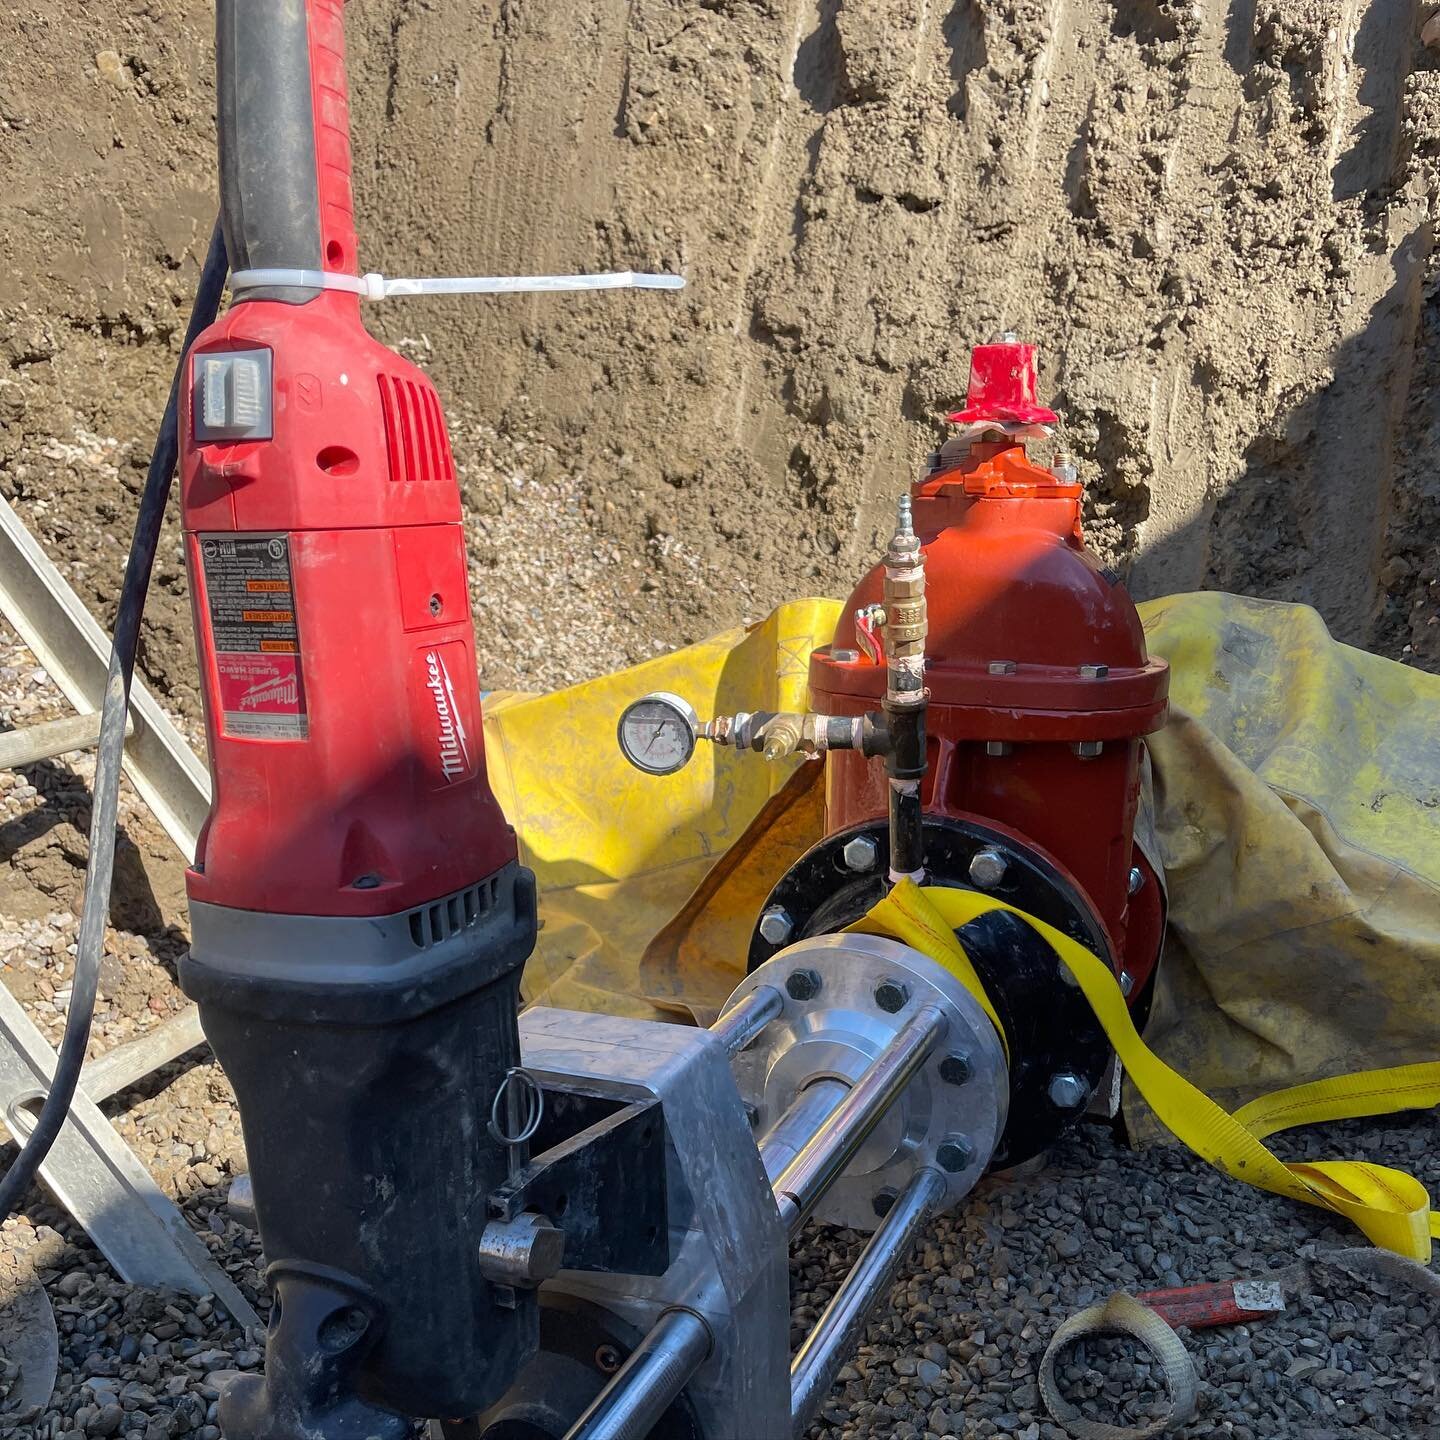 Kang Construction in @cityofchestermere was paid a visit today for a 10X8 tap 🛠🚧

#hottapping #plumbing #construction #trucks #hydrant #fyp #yyc #alberta #f4f #work #britishcolumbia #saskatchewan #hvac #clow